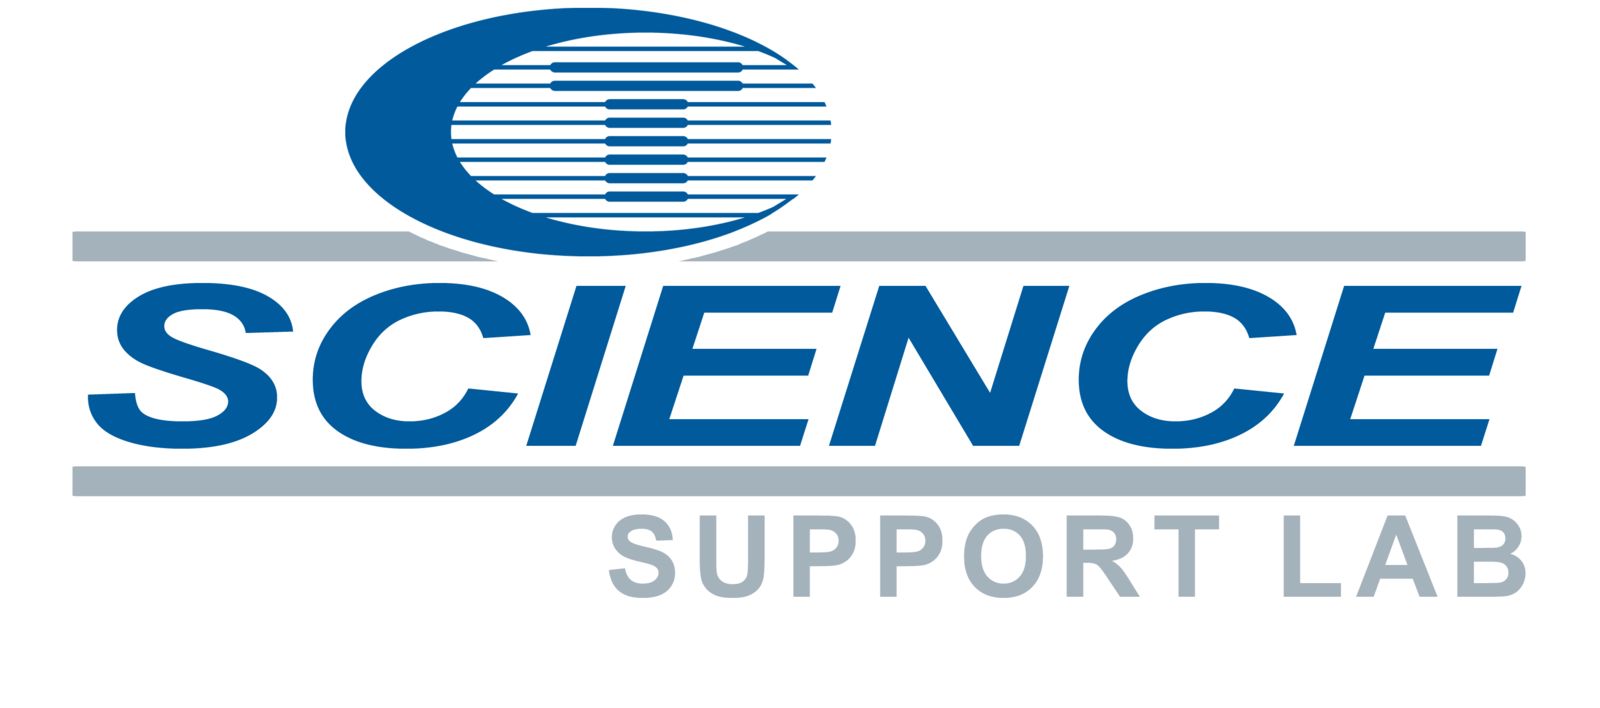 science support lab logo – Columbus Technical College